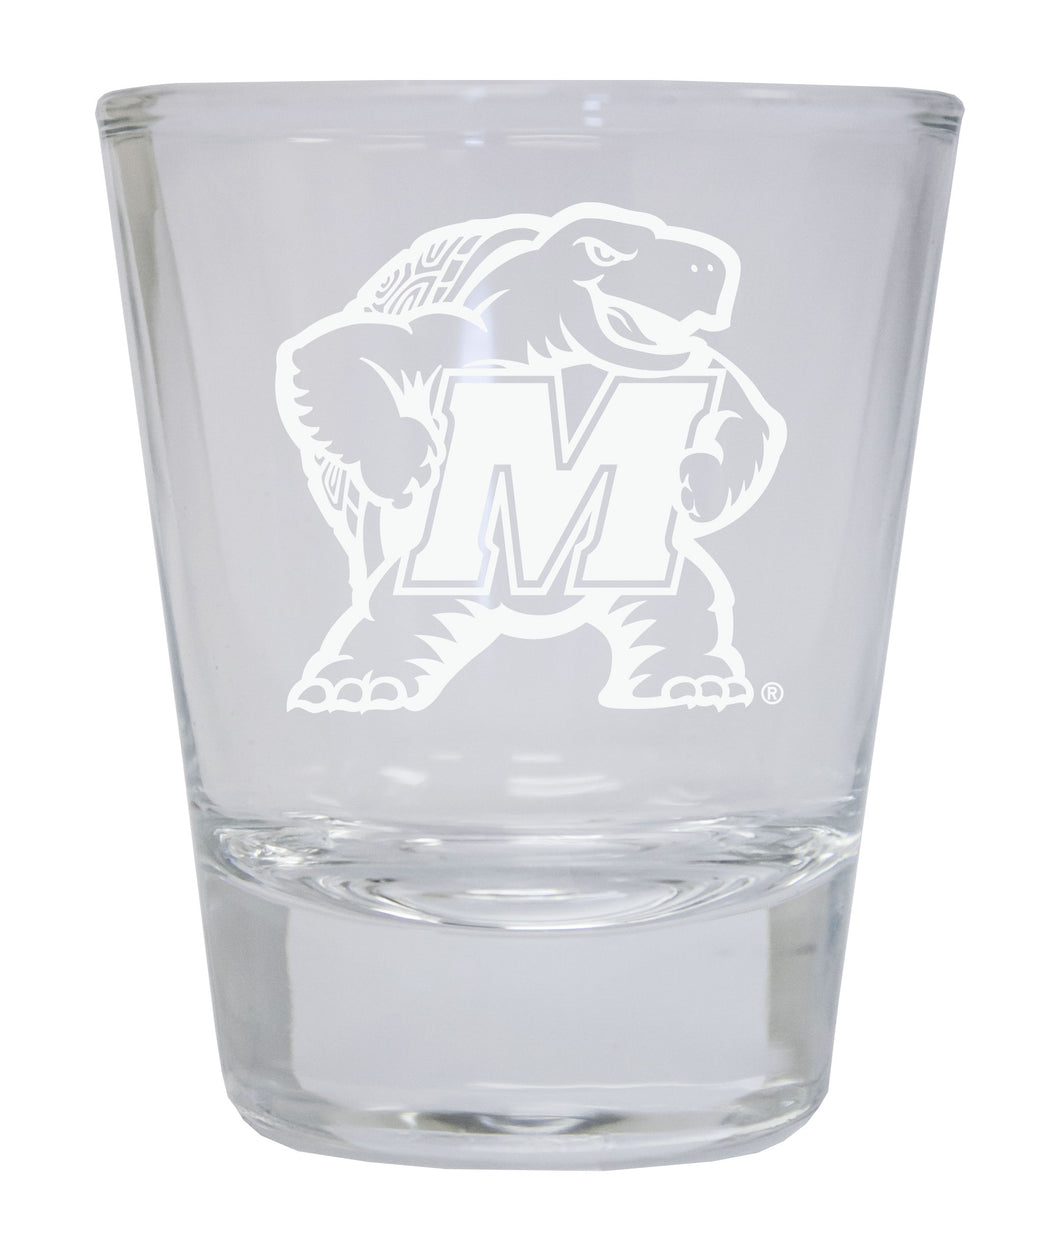 Maryland Terrapins Etched Round Shot Glass Officially Licensed Collegiate Product